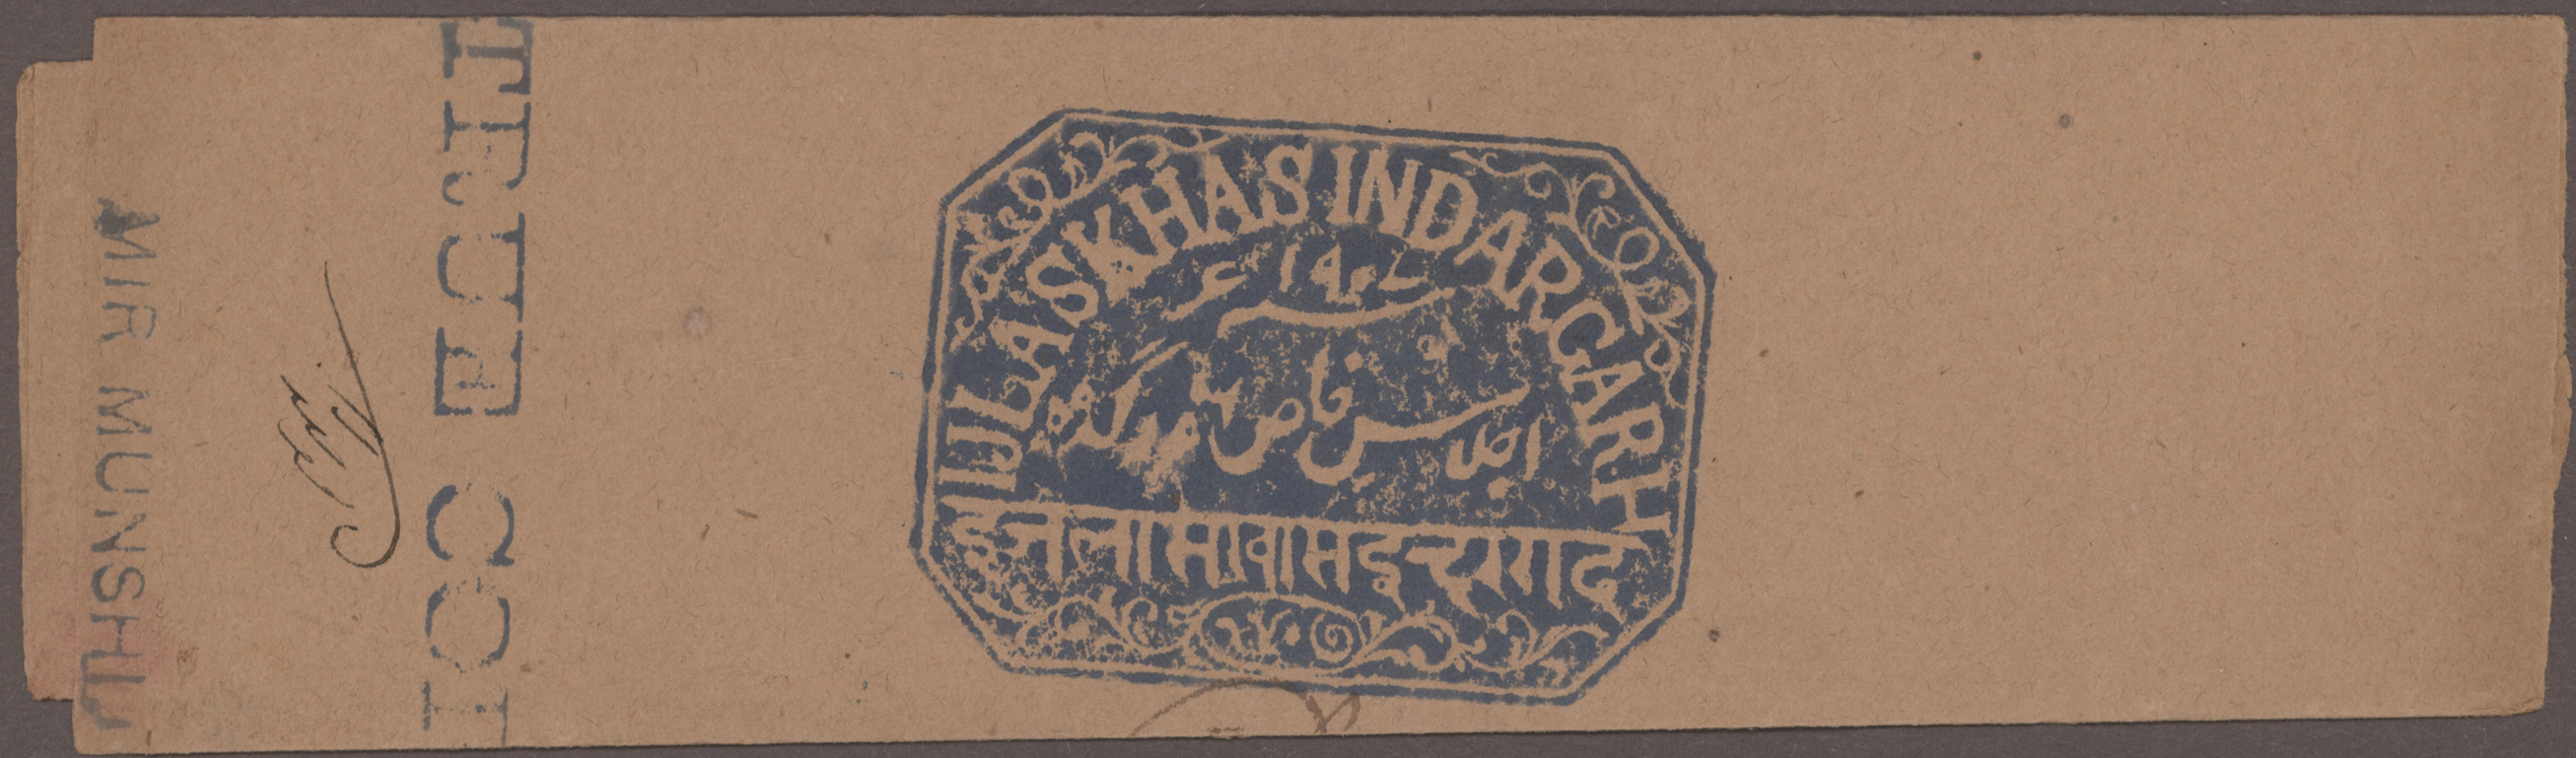 Lot 7340 - Indien - Feudalstaaten  -  Auktionshaus Christoph Gärtner GmbH & Co. KG 54th AUCTION - Day 4